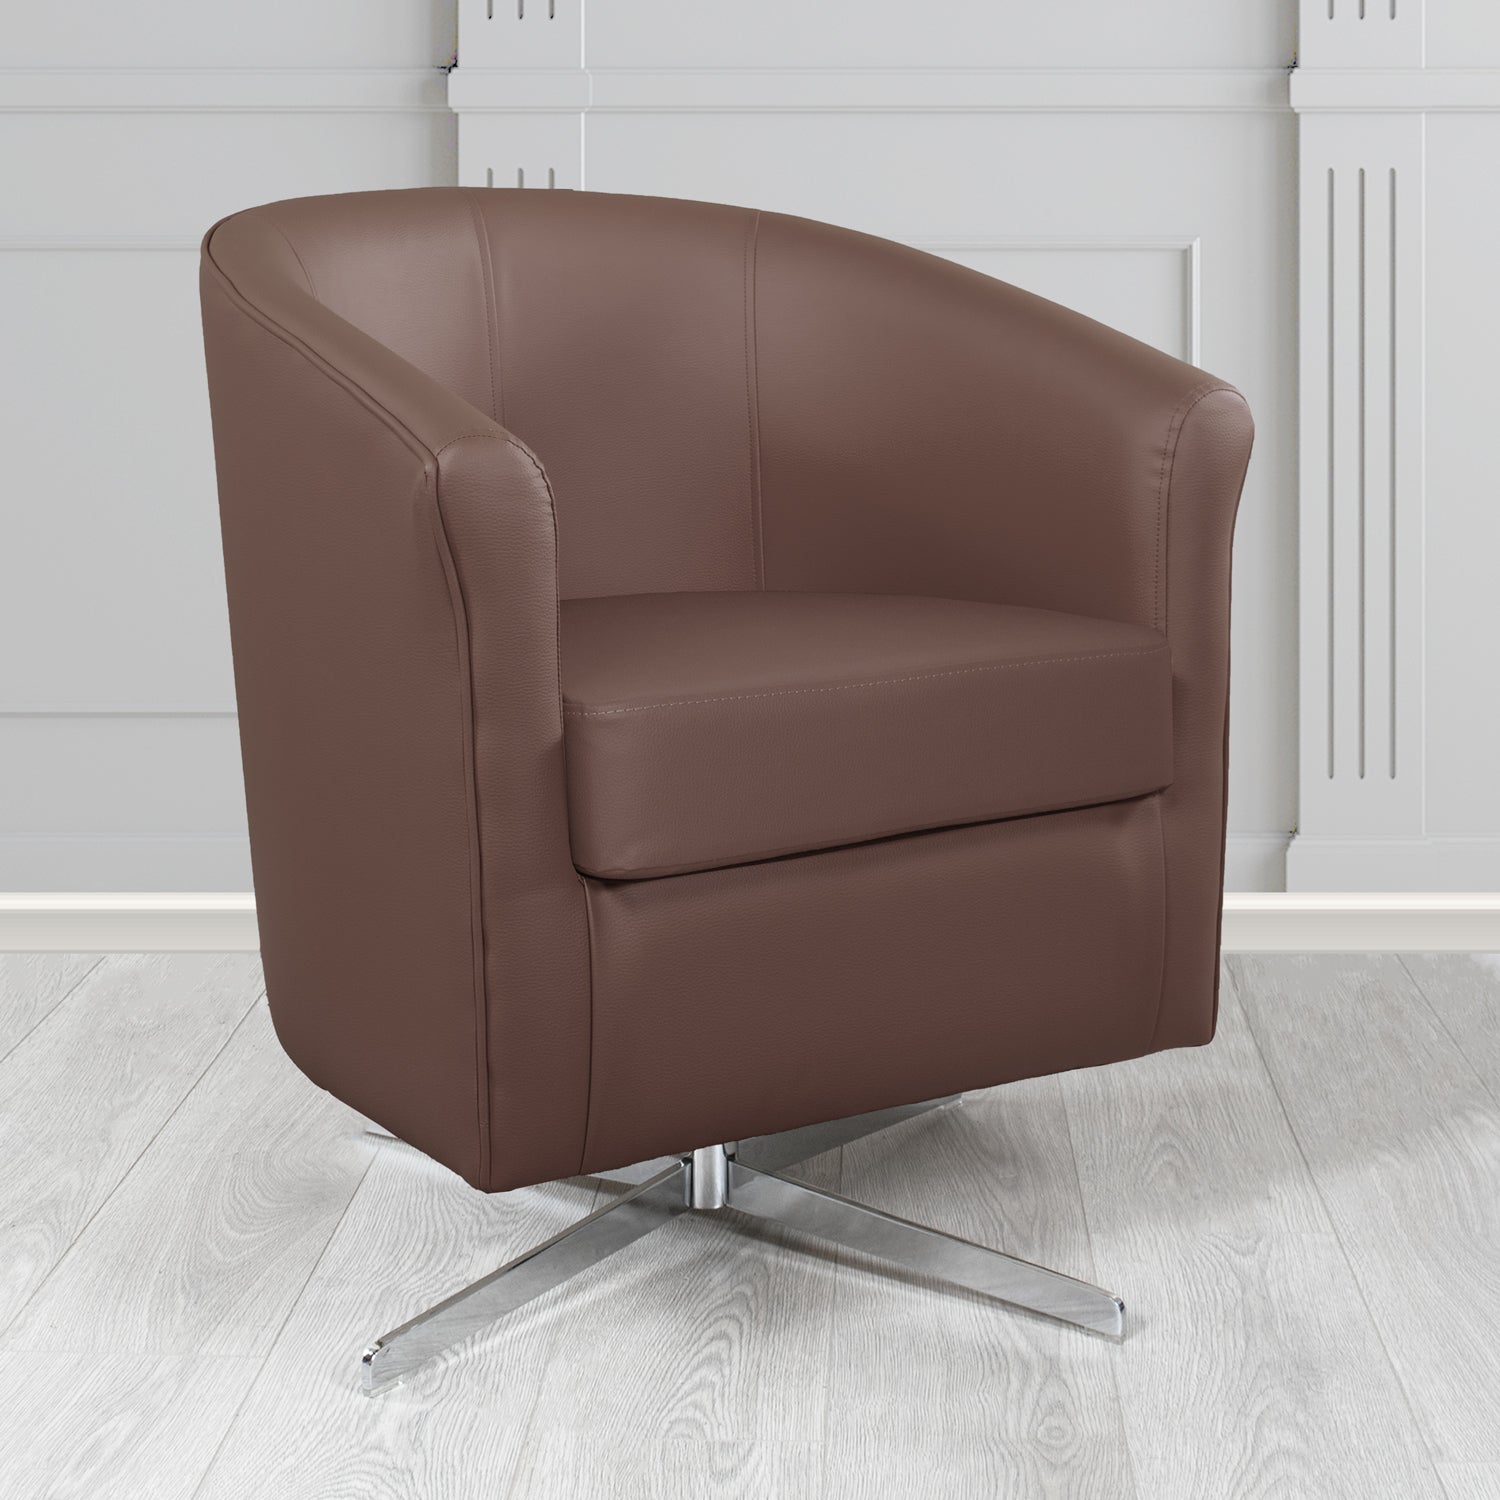 Cannes Swivel Tub Chair in Just Colour Cocoa Crib 5 Faux Leather